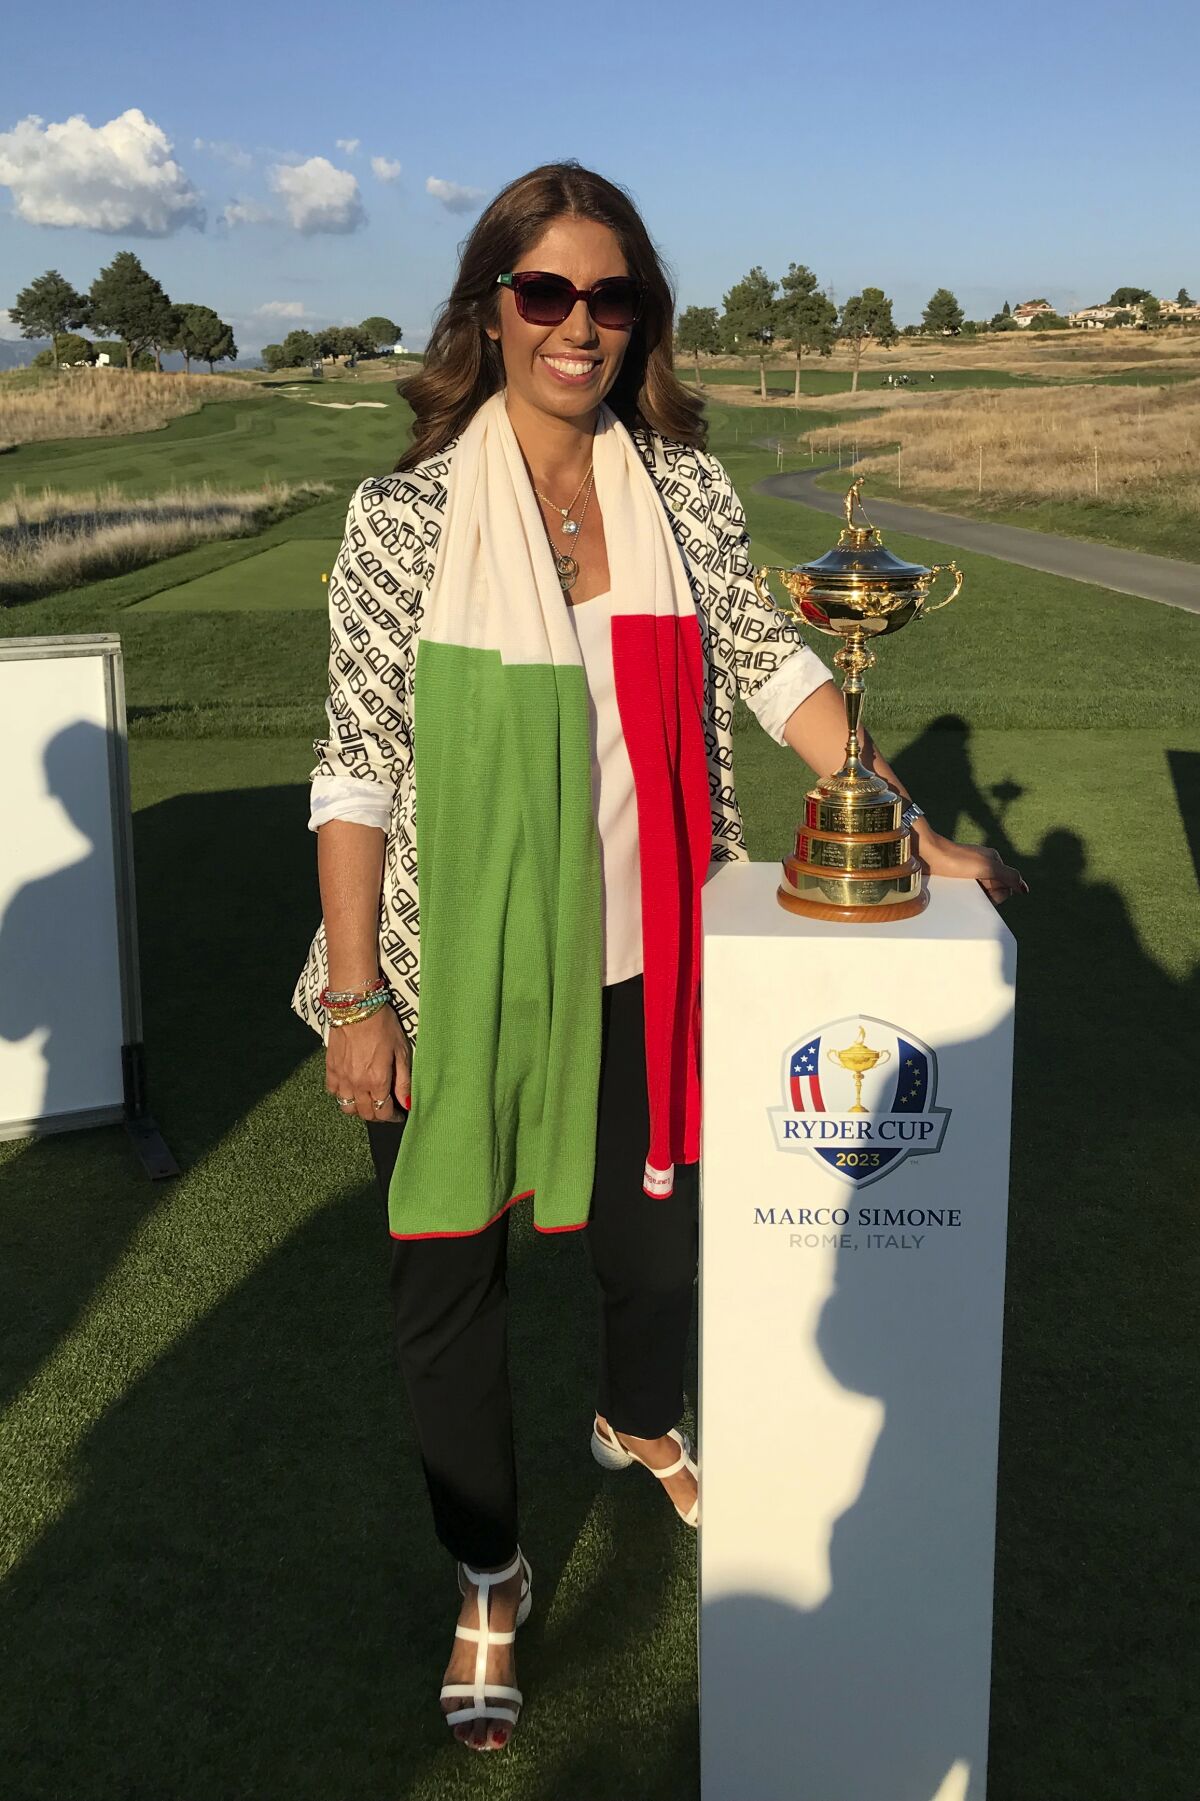 Lavinia Biagiotti Cigna poses by the Ryder Cup trophy at the Marco Simone Golf and Country Club, in Guidonia, on the outskirts of Rome, Wednesday, Sept. 1, 2021. An 11th-century castle. A grove of olive trees. The remains of an ancient Roman villa. Views of St. Peter’s Basilica on the horizon. The terrain surrounding and comprising the Marco Simone Golf and Country Club on Rome’s outskirts that will host the 2023 Ryder Cup is quintessential Italy. And no one knows that better than fashion designer Lavinia Biagiotti Cigna, who owns and runs the club. Biagiotti Cigna also lives on the club grounds with her three dogs — in the castle, of course, which is situated between a bend in the course wedged between the sixth and eighth holes. Astronomer Galileo Galilei once lived in the castle, too. (AP Photo/Andrew Dampf)